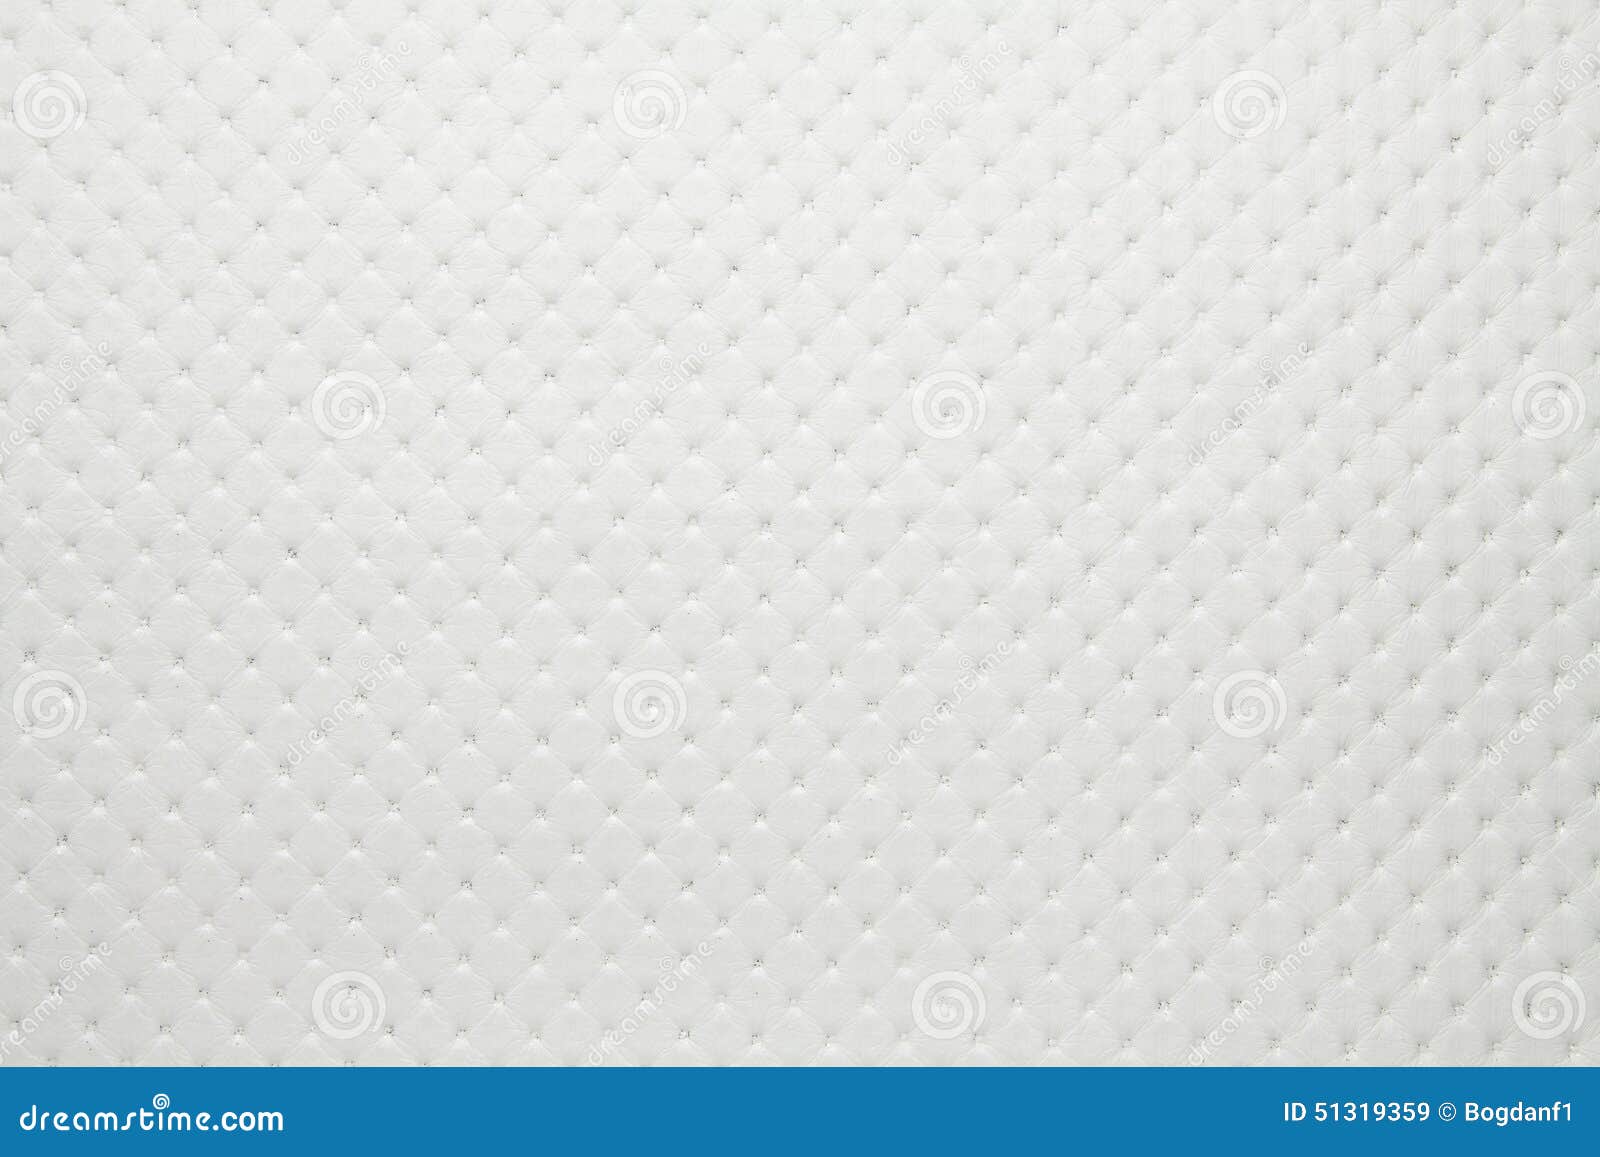 artificial fabric texture punto 19658 white color dotted